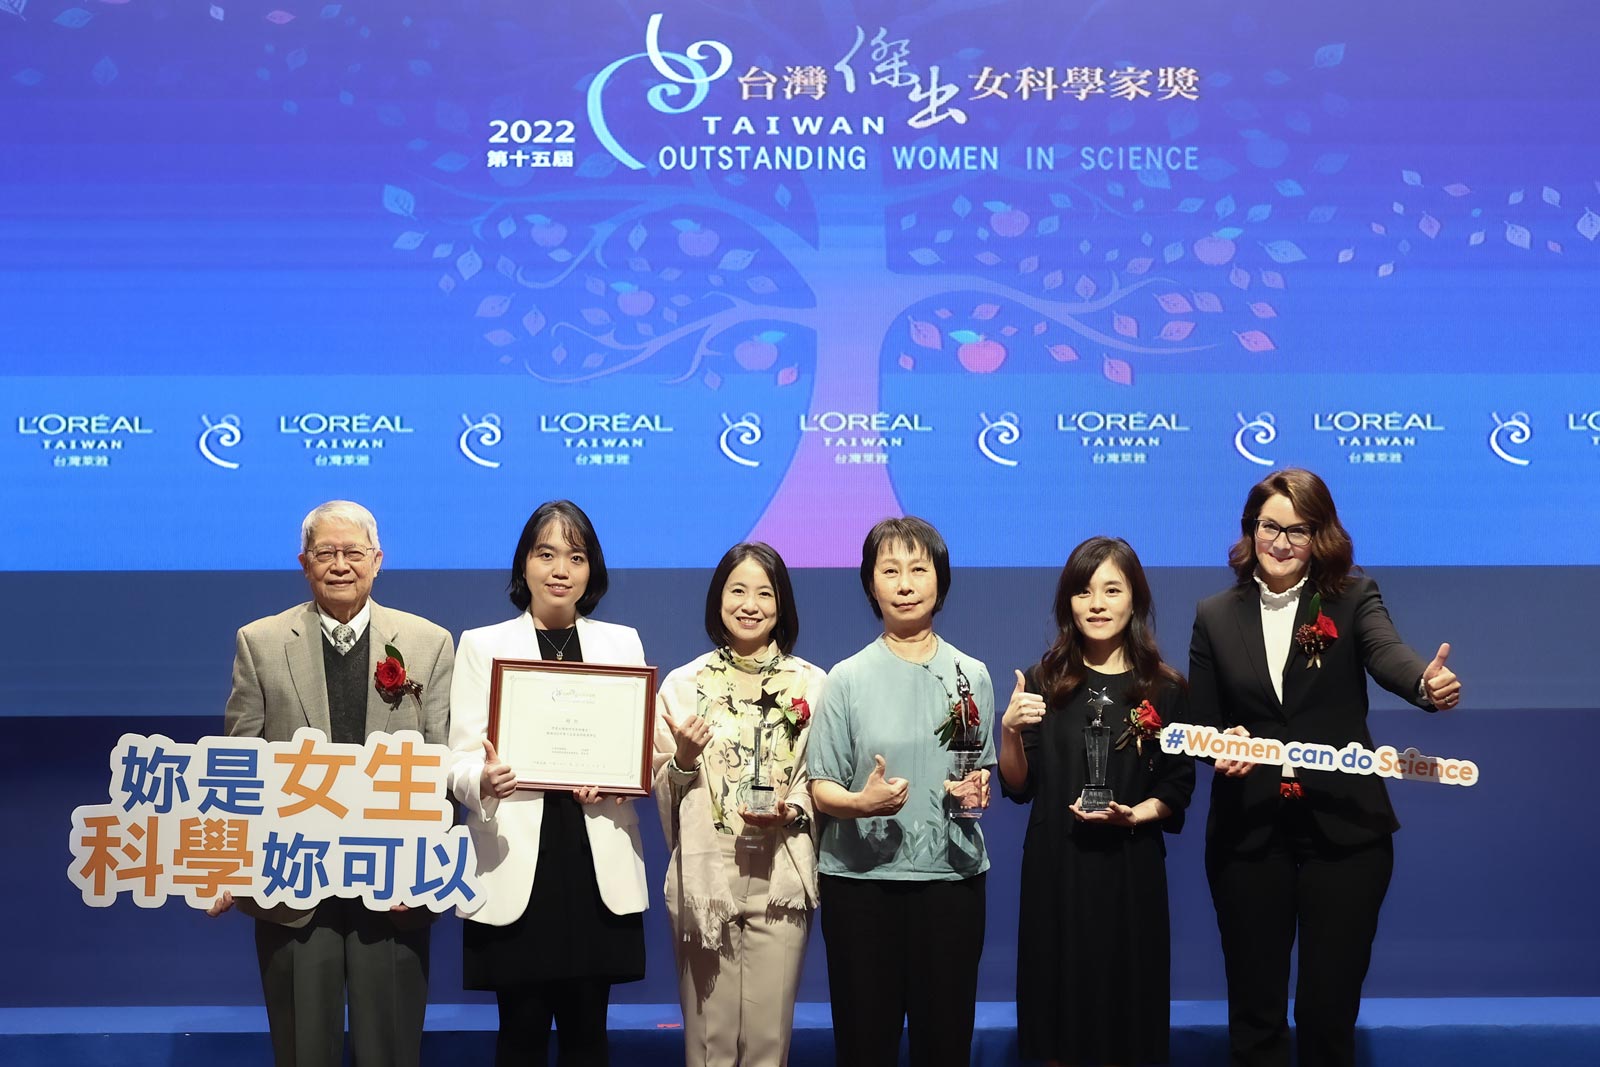 Why does L'Oréal Taiwan award female scientists?